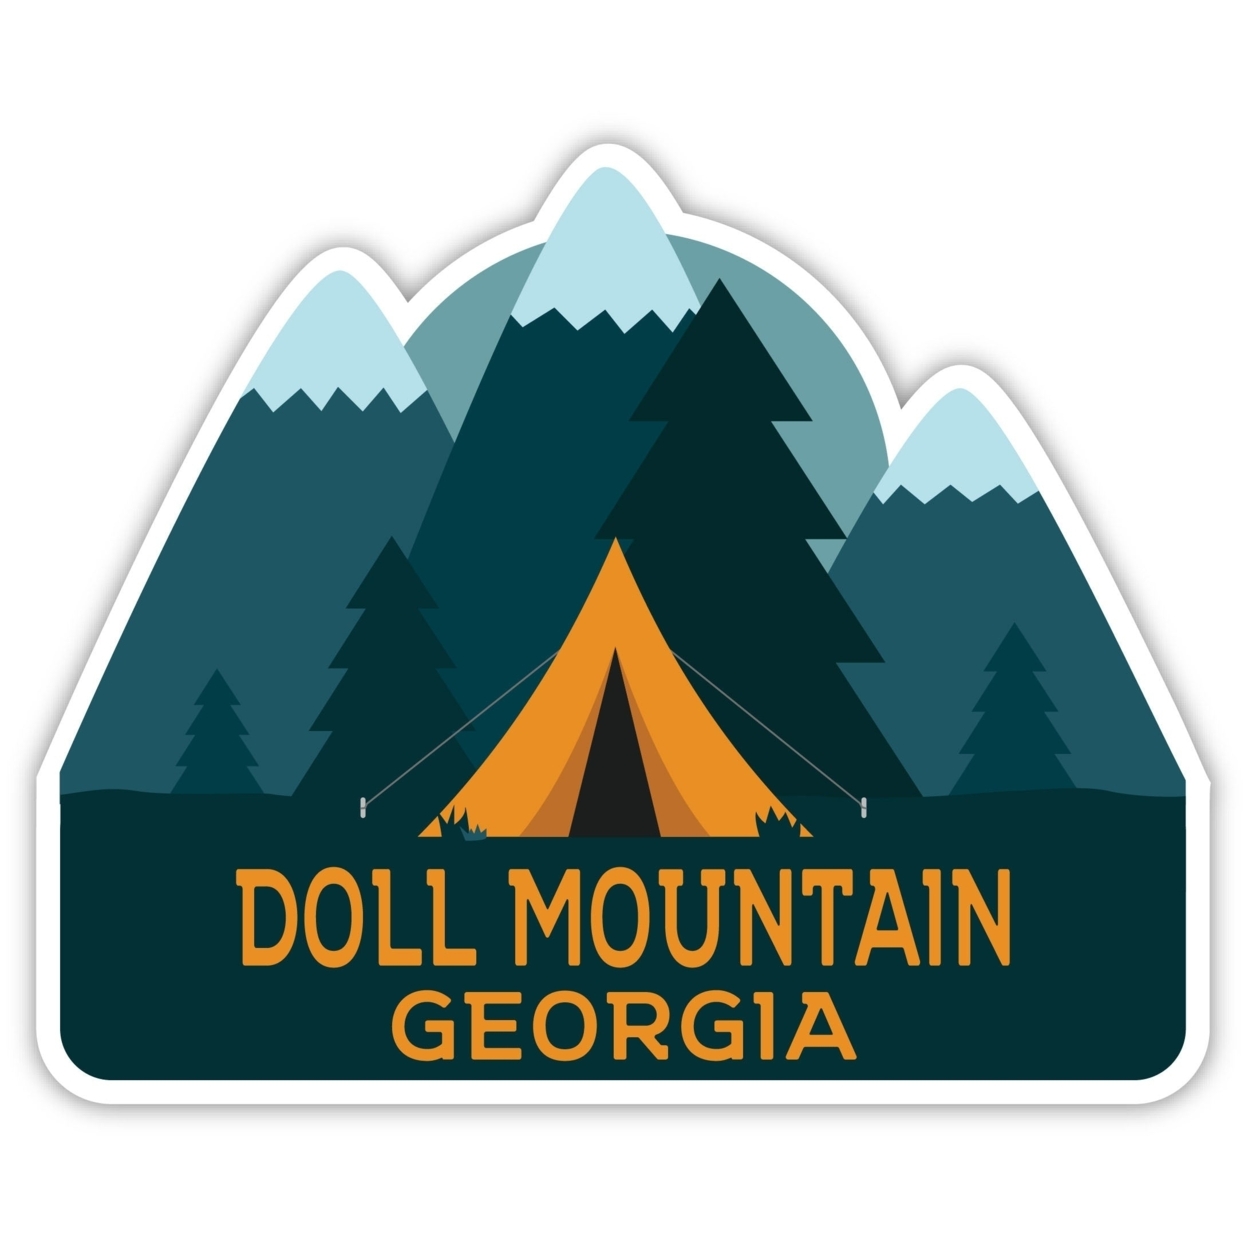 Doll Mountain Georgia Souvenir Decorative Stickers (Choose Theme And Size) - 4-Pack, 4-Inch, Tent